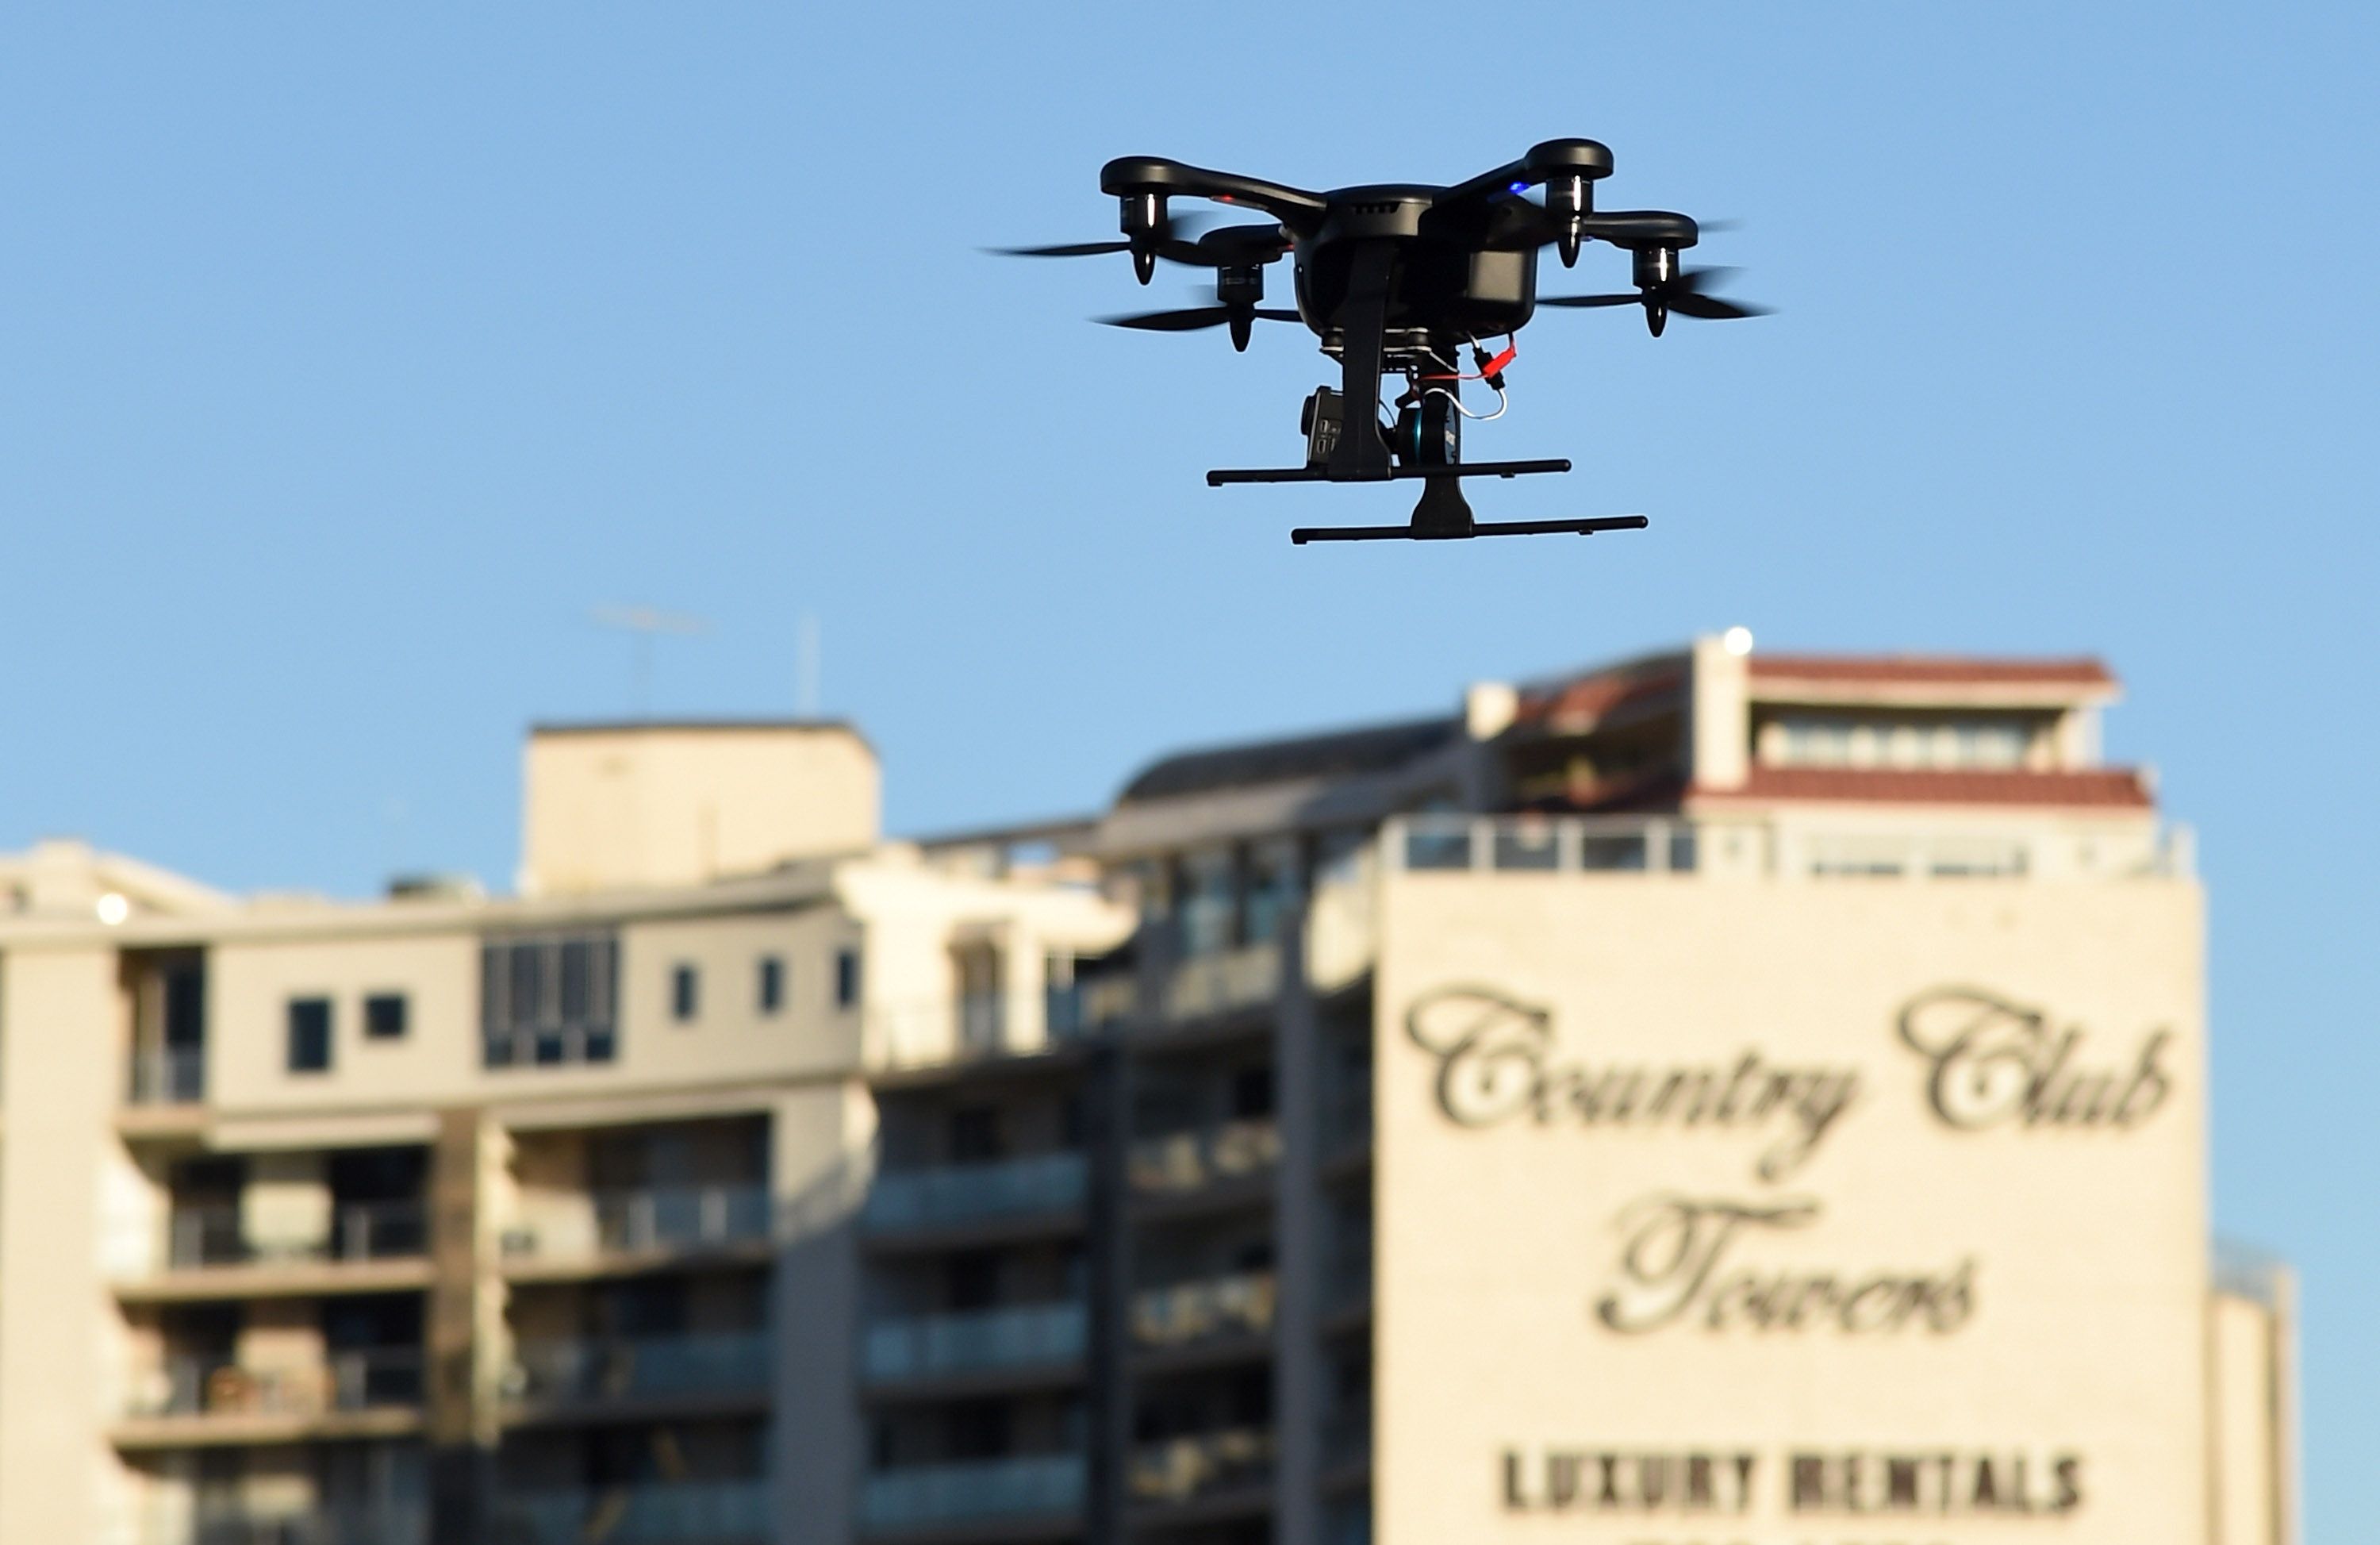 A Ghost drone by Ehang flies at the 2015 International CES outside the Las Vegas Convention Center on January 8, 2015 in Las VegaPhoto: AFP